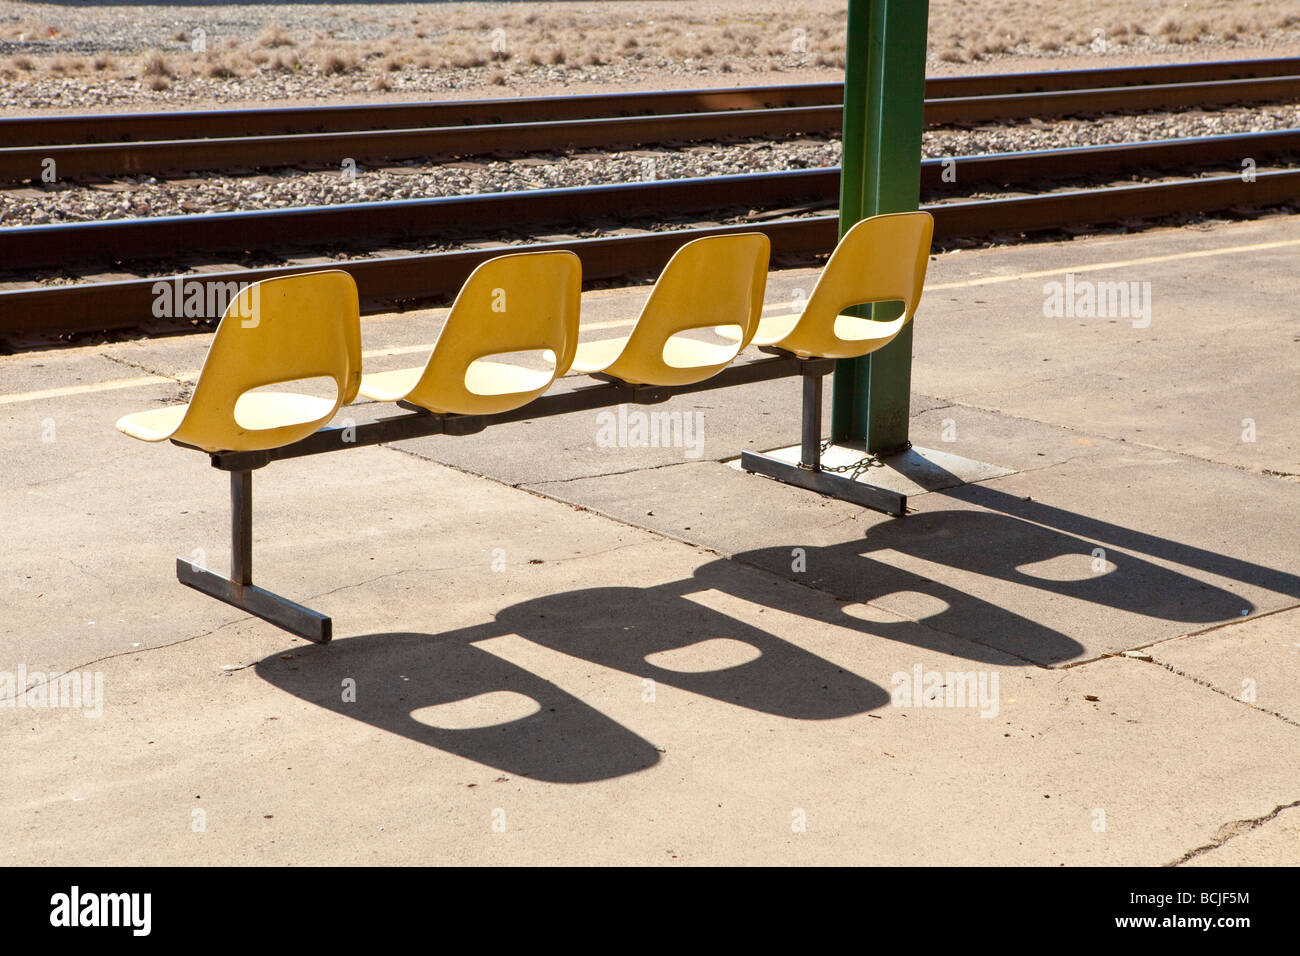 Row of four yellow chairs casting shadows on train platform at train station with rail tracks in background Stock Photo